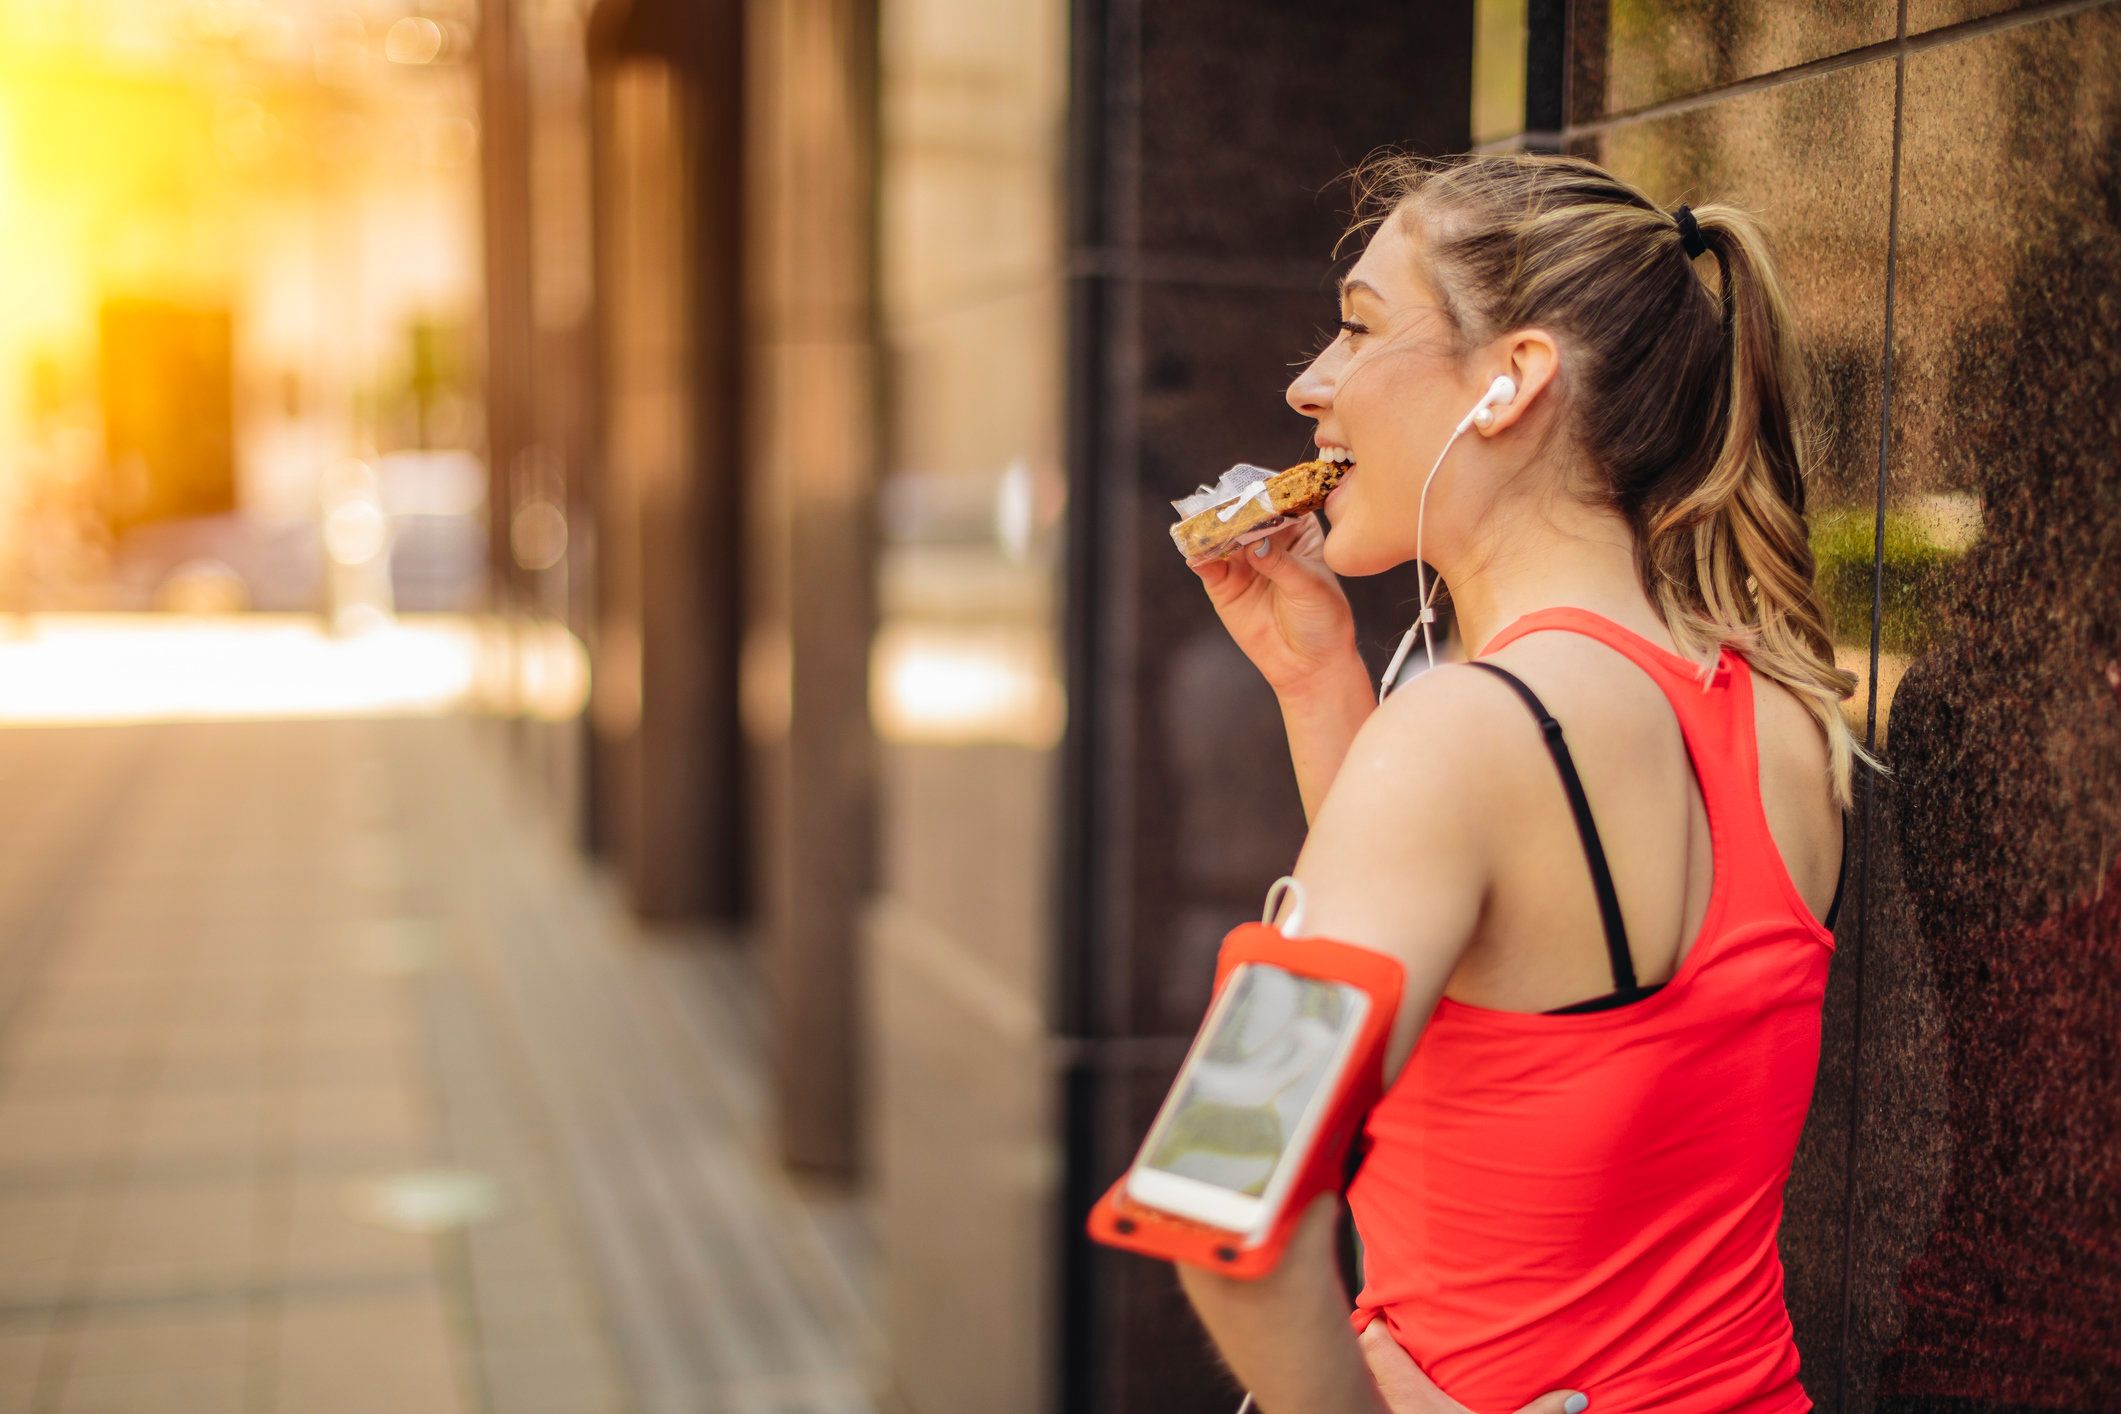 woman stops on street after workout and eats a healthy snack, looks happy